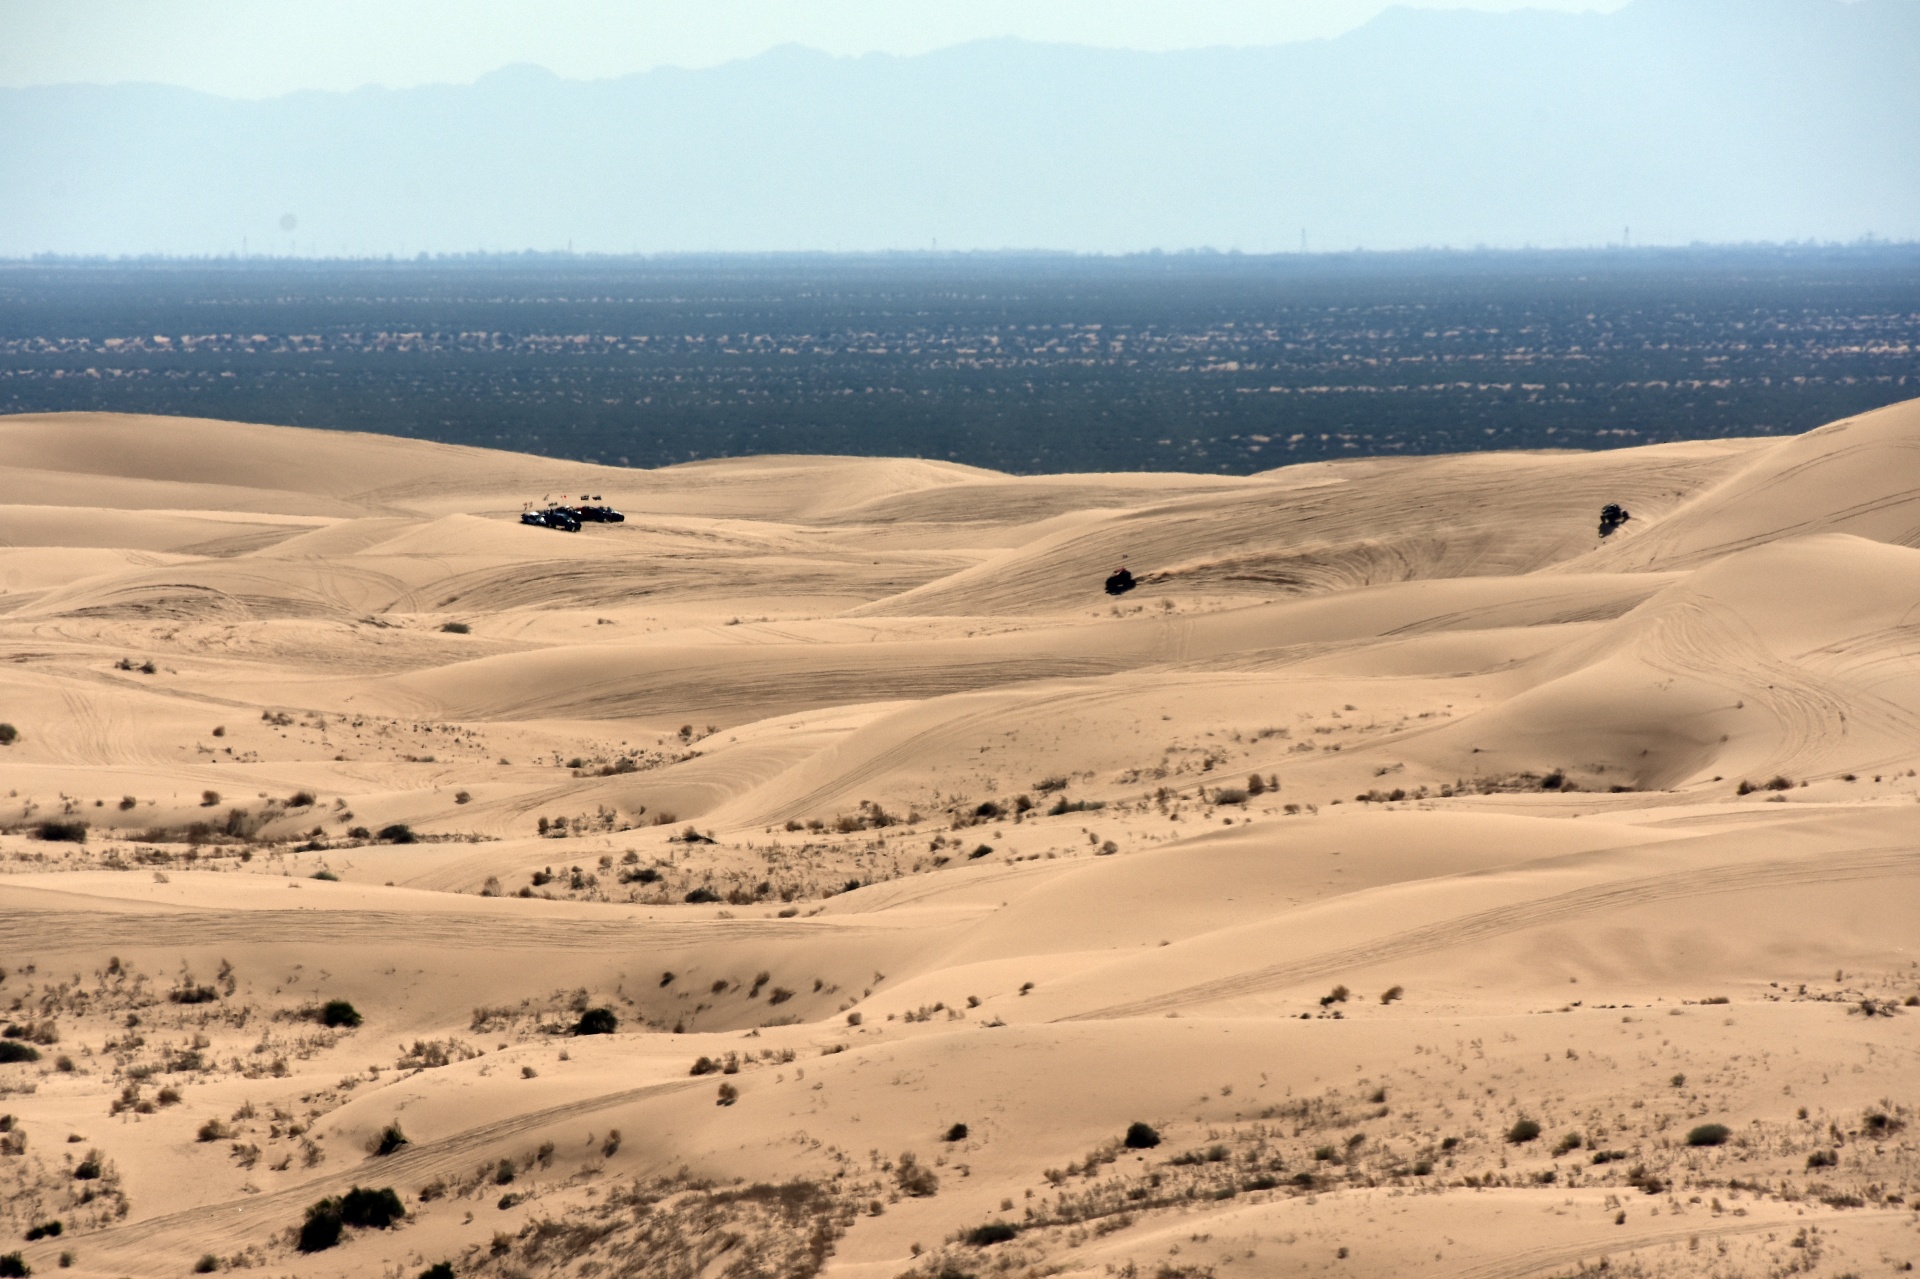 several dune buggies scale the heights of the glamis sand dunes in California